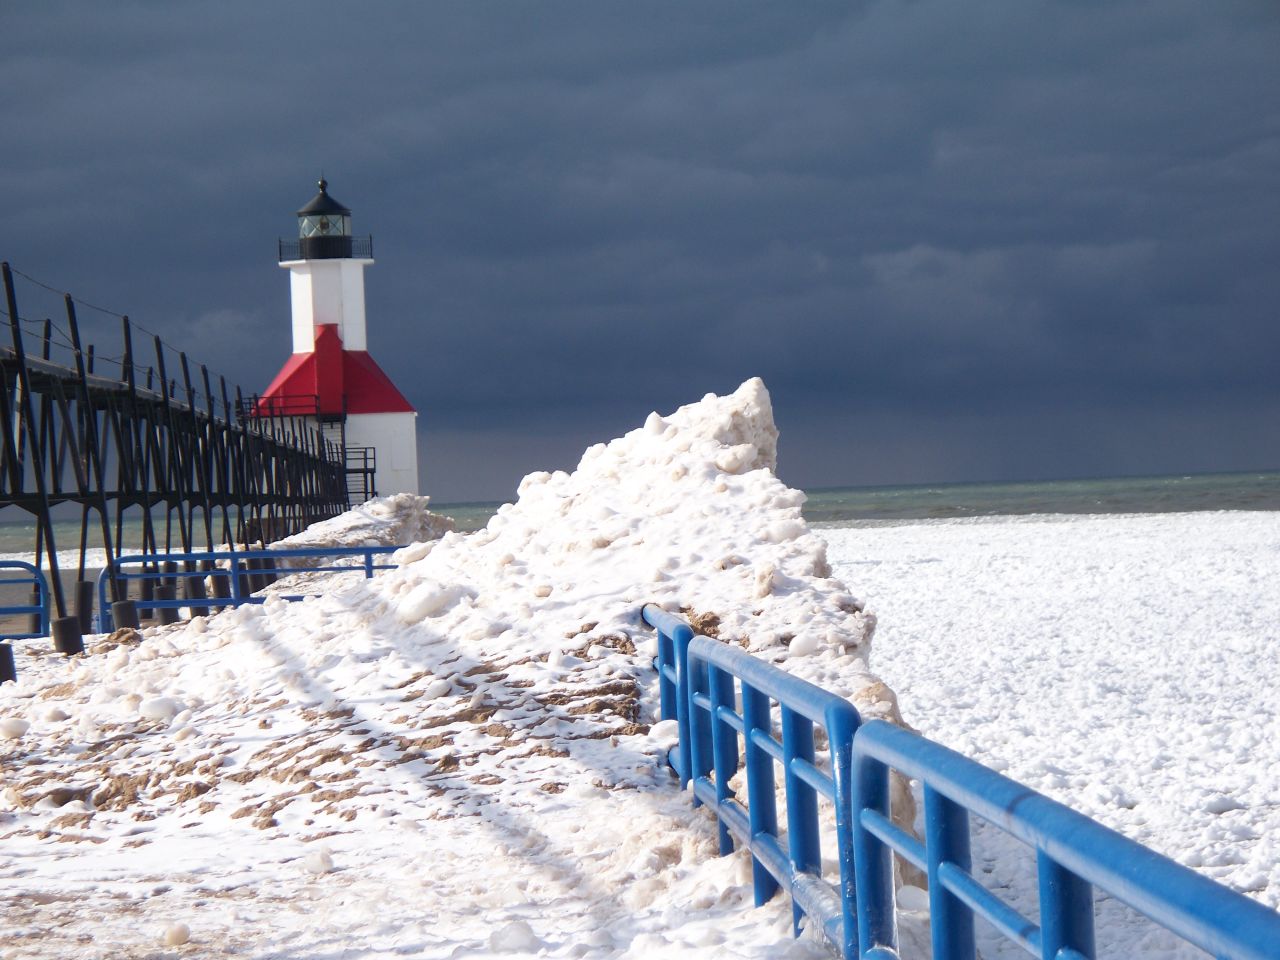 <a href="http://ireport.cnn.com/docs/DOC-1157394">Jenn Landreth</a> travels up to Lake Michigan once a year for the ice carving festivals and had to get a photo of this lighthouse in St. Joseph, Michigan. She loves the contrast here of the lighthouse in the snow. "It's funny, people tell me how beautiful these lighthouses are in the summer, and I have yet to make it up there when there isn't snow."